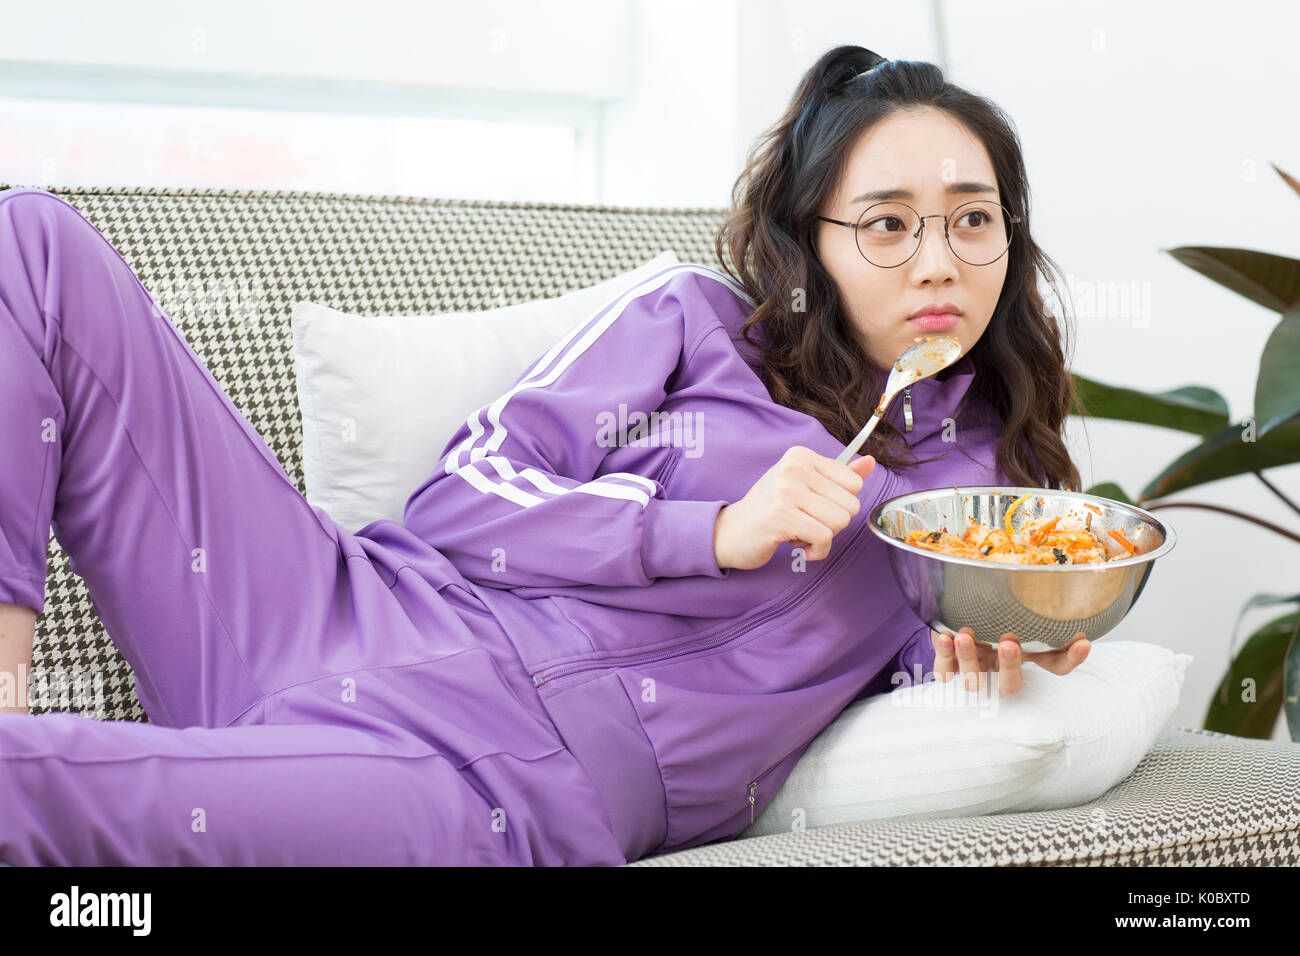 Young NEET woman watching TV eating meal Stock Photo